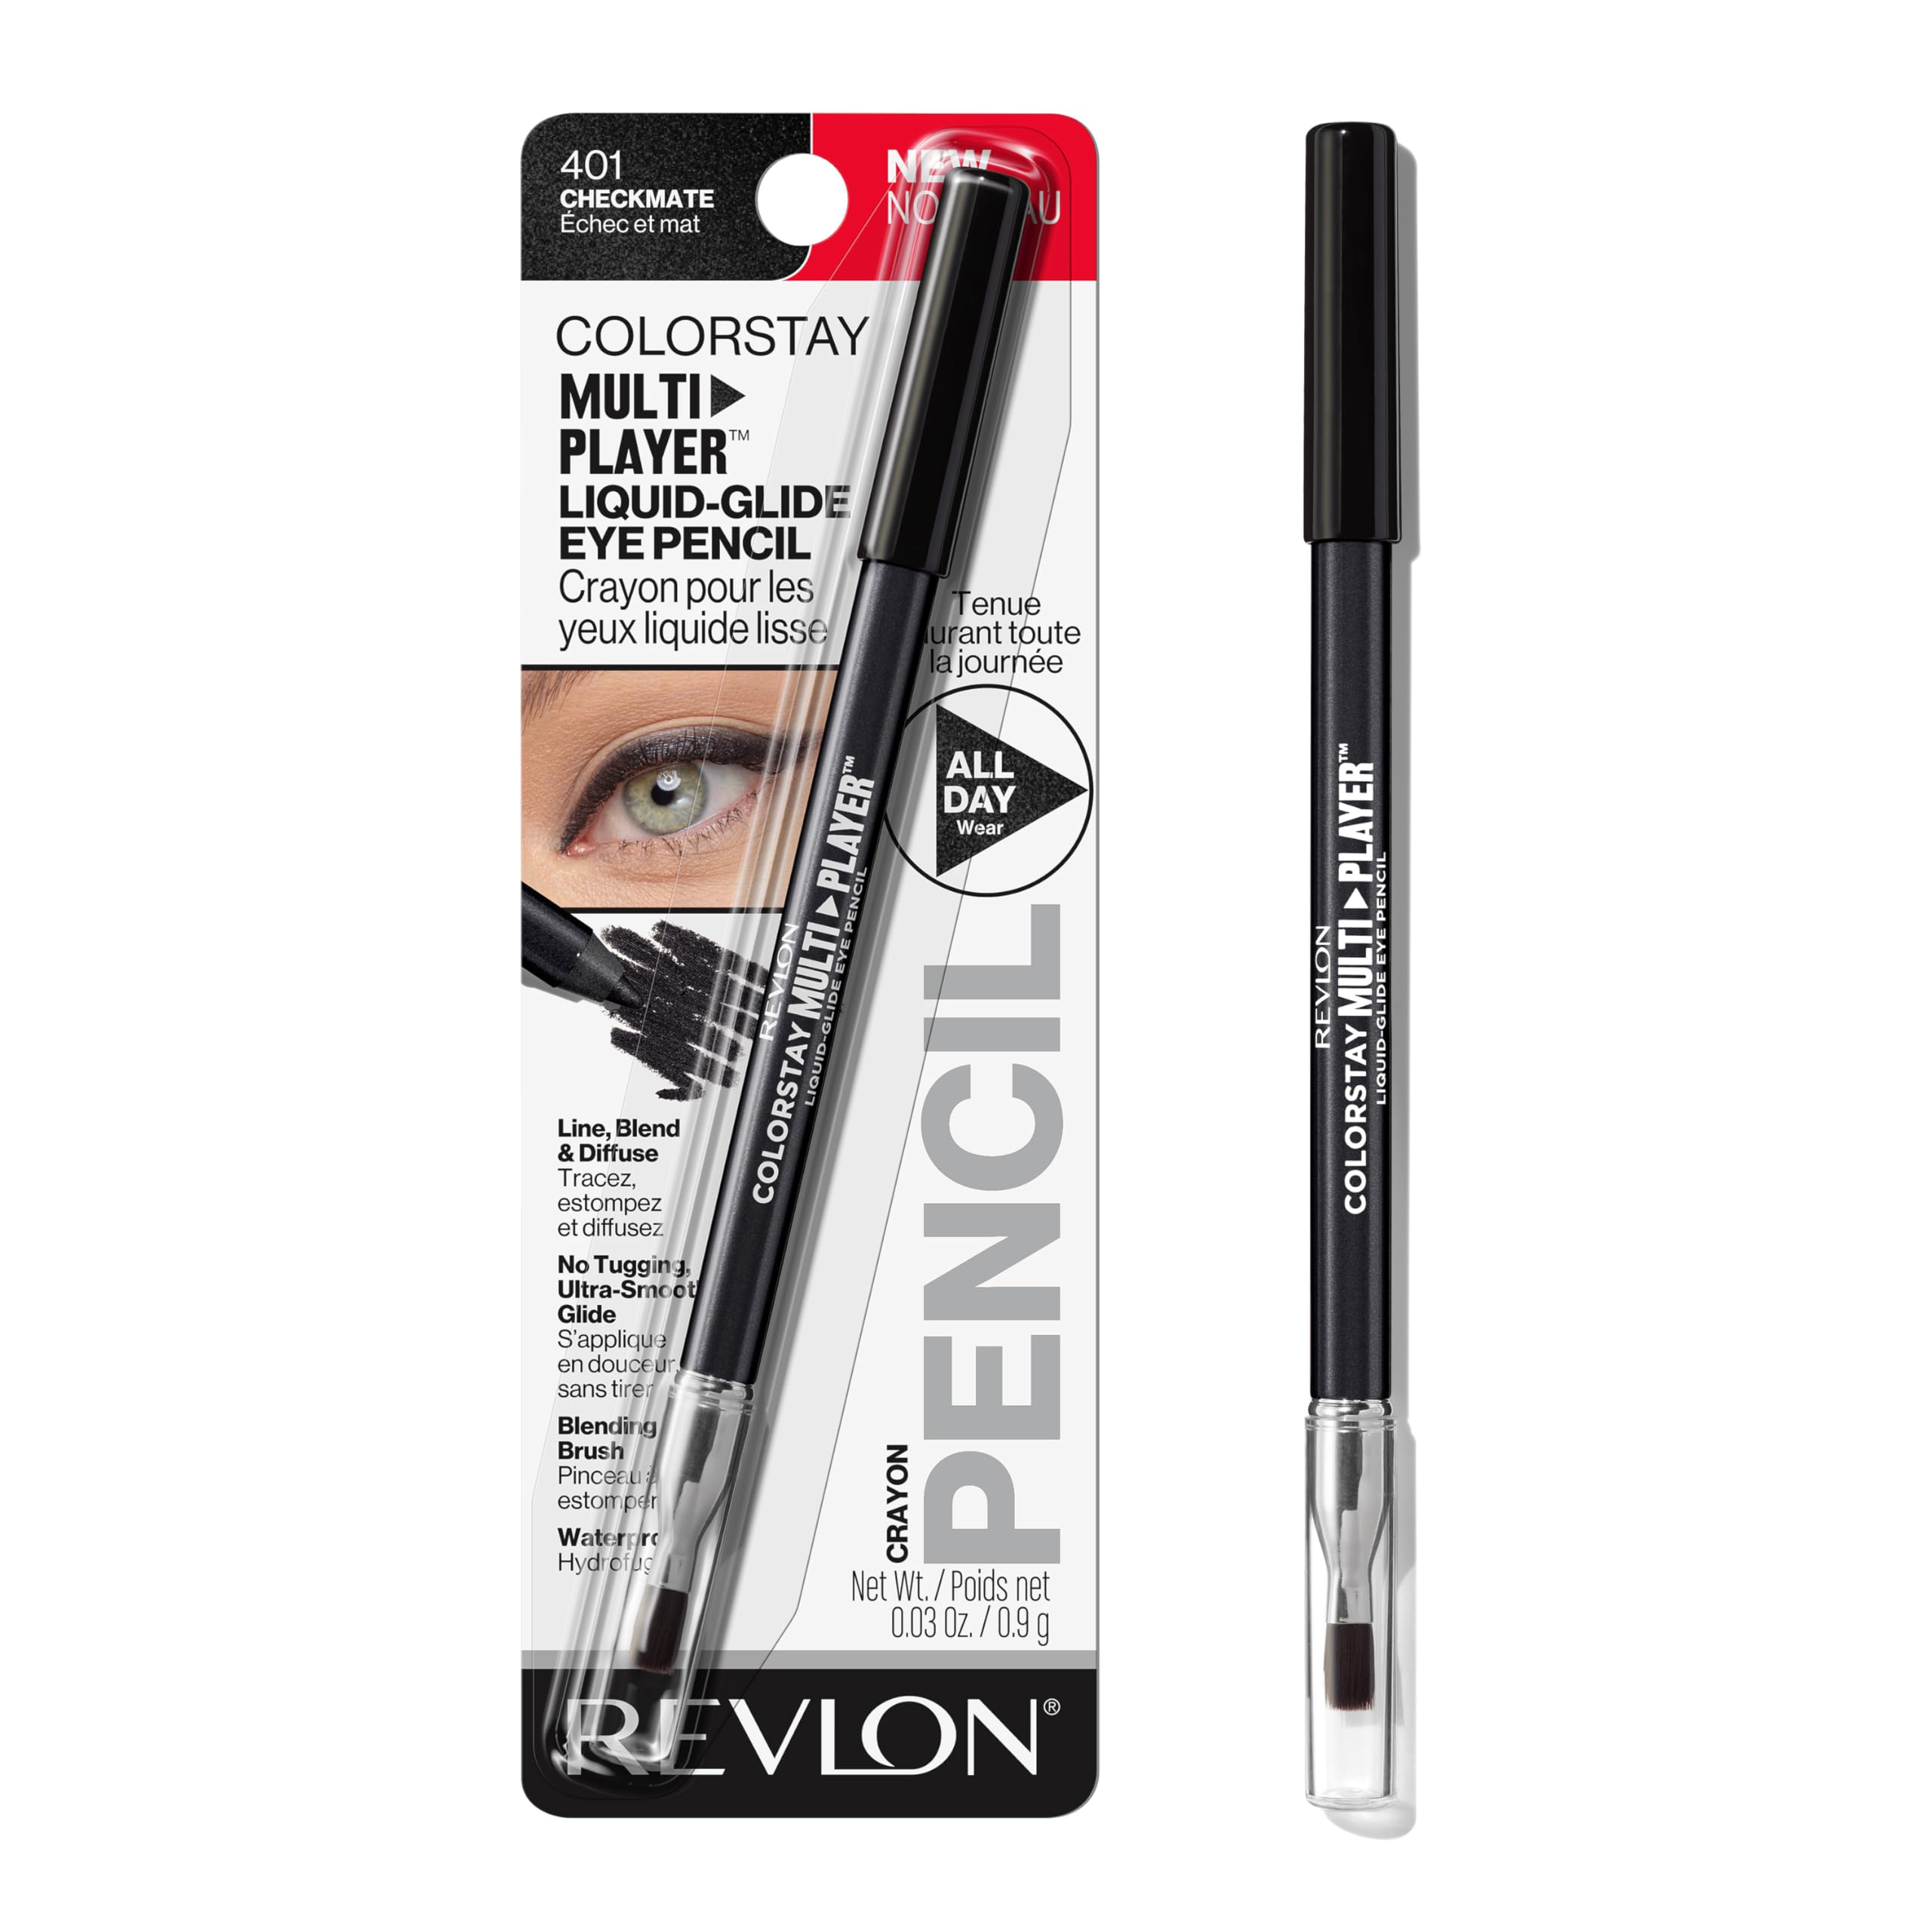 REVLON ColorStay Multiplayer Liquid-Glide Eye Pencil, Multi-Use Eye Makeup With Blending Brush, Blends Then Sets, Creamy Texture, Waterproof, Smudge-proof, Longwearing, 401 Checkmate, 0.03 oz